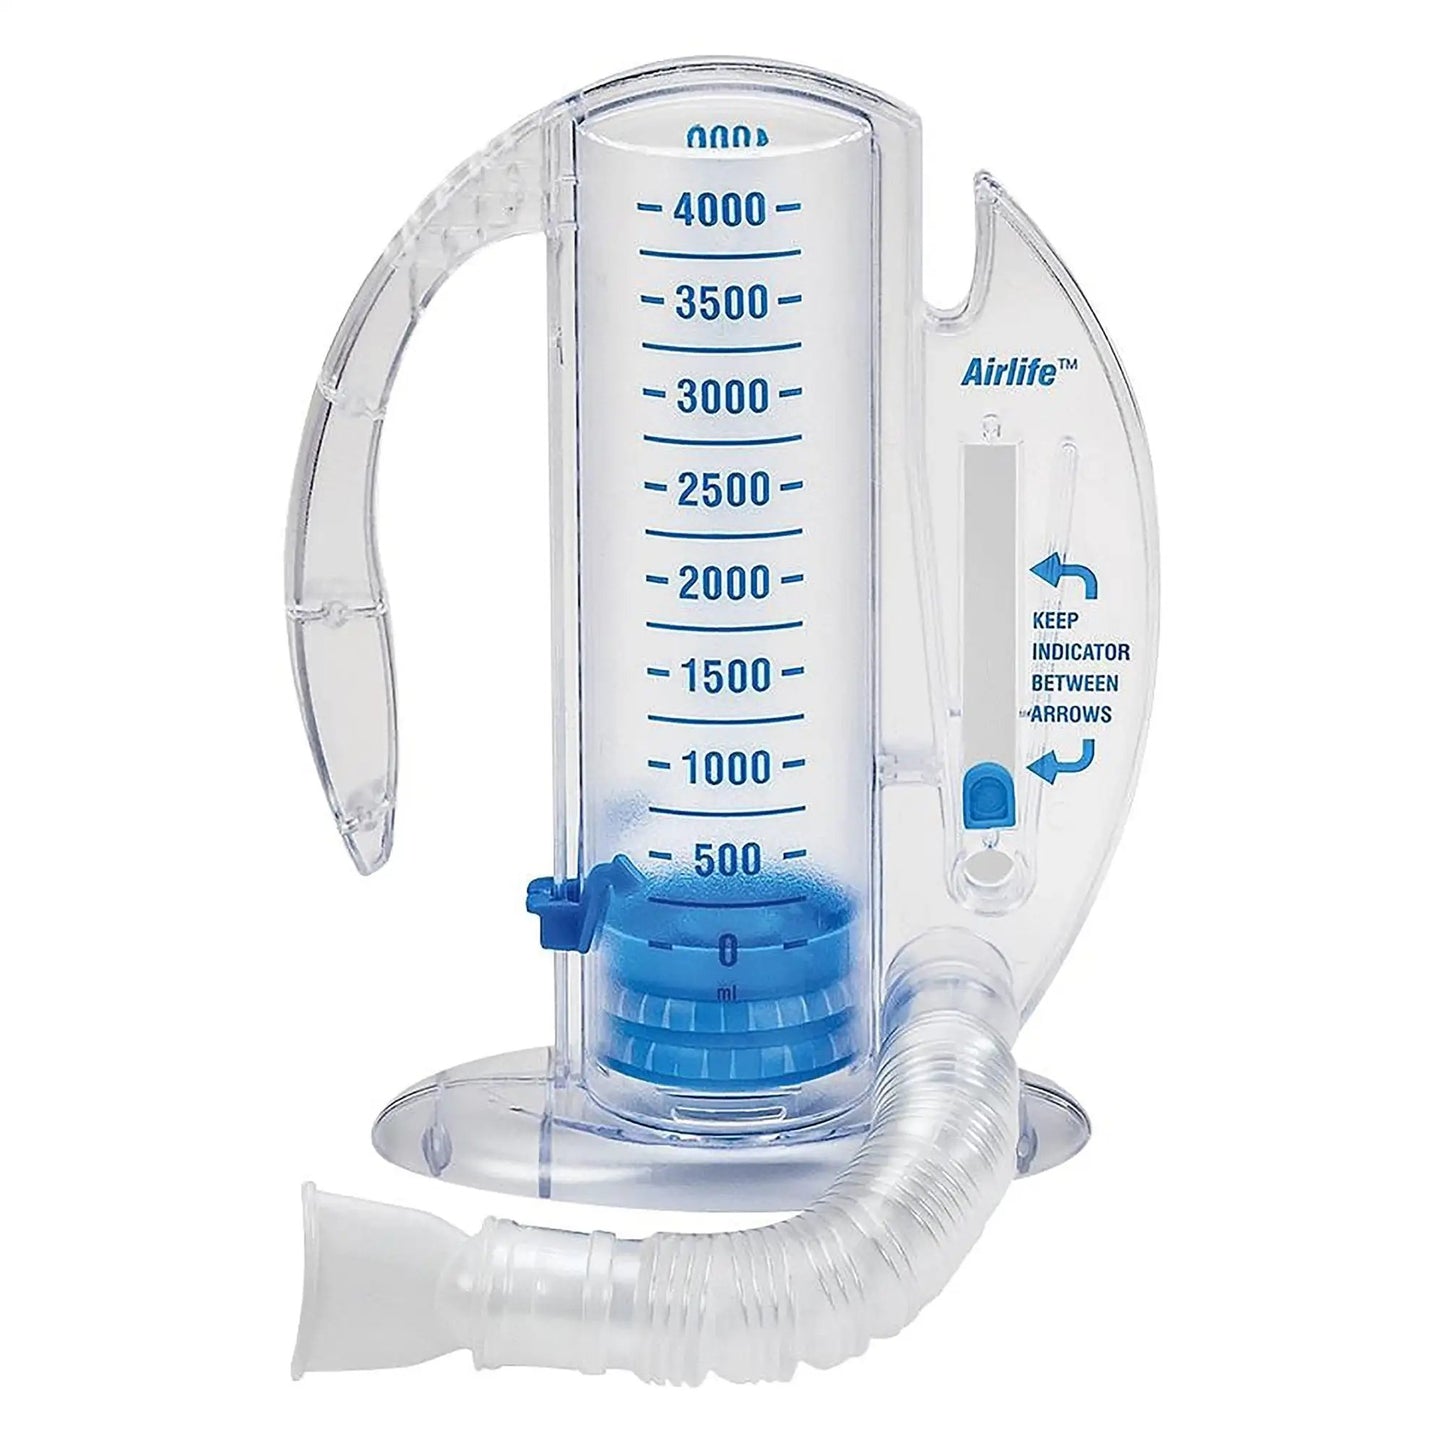 Vyaire Medical AirLife One-Way Manual Spirometer